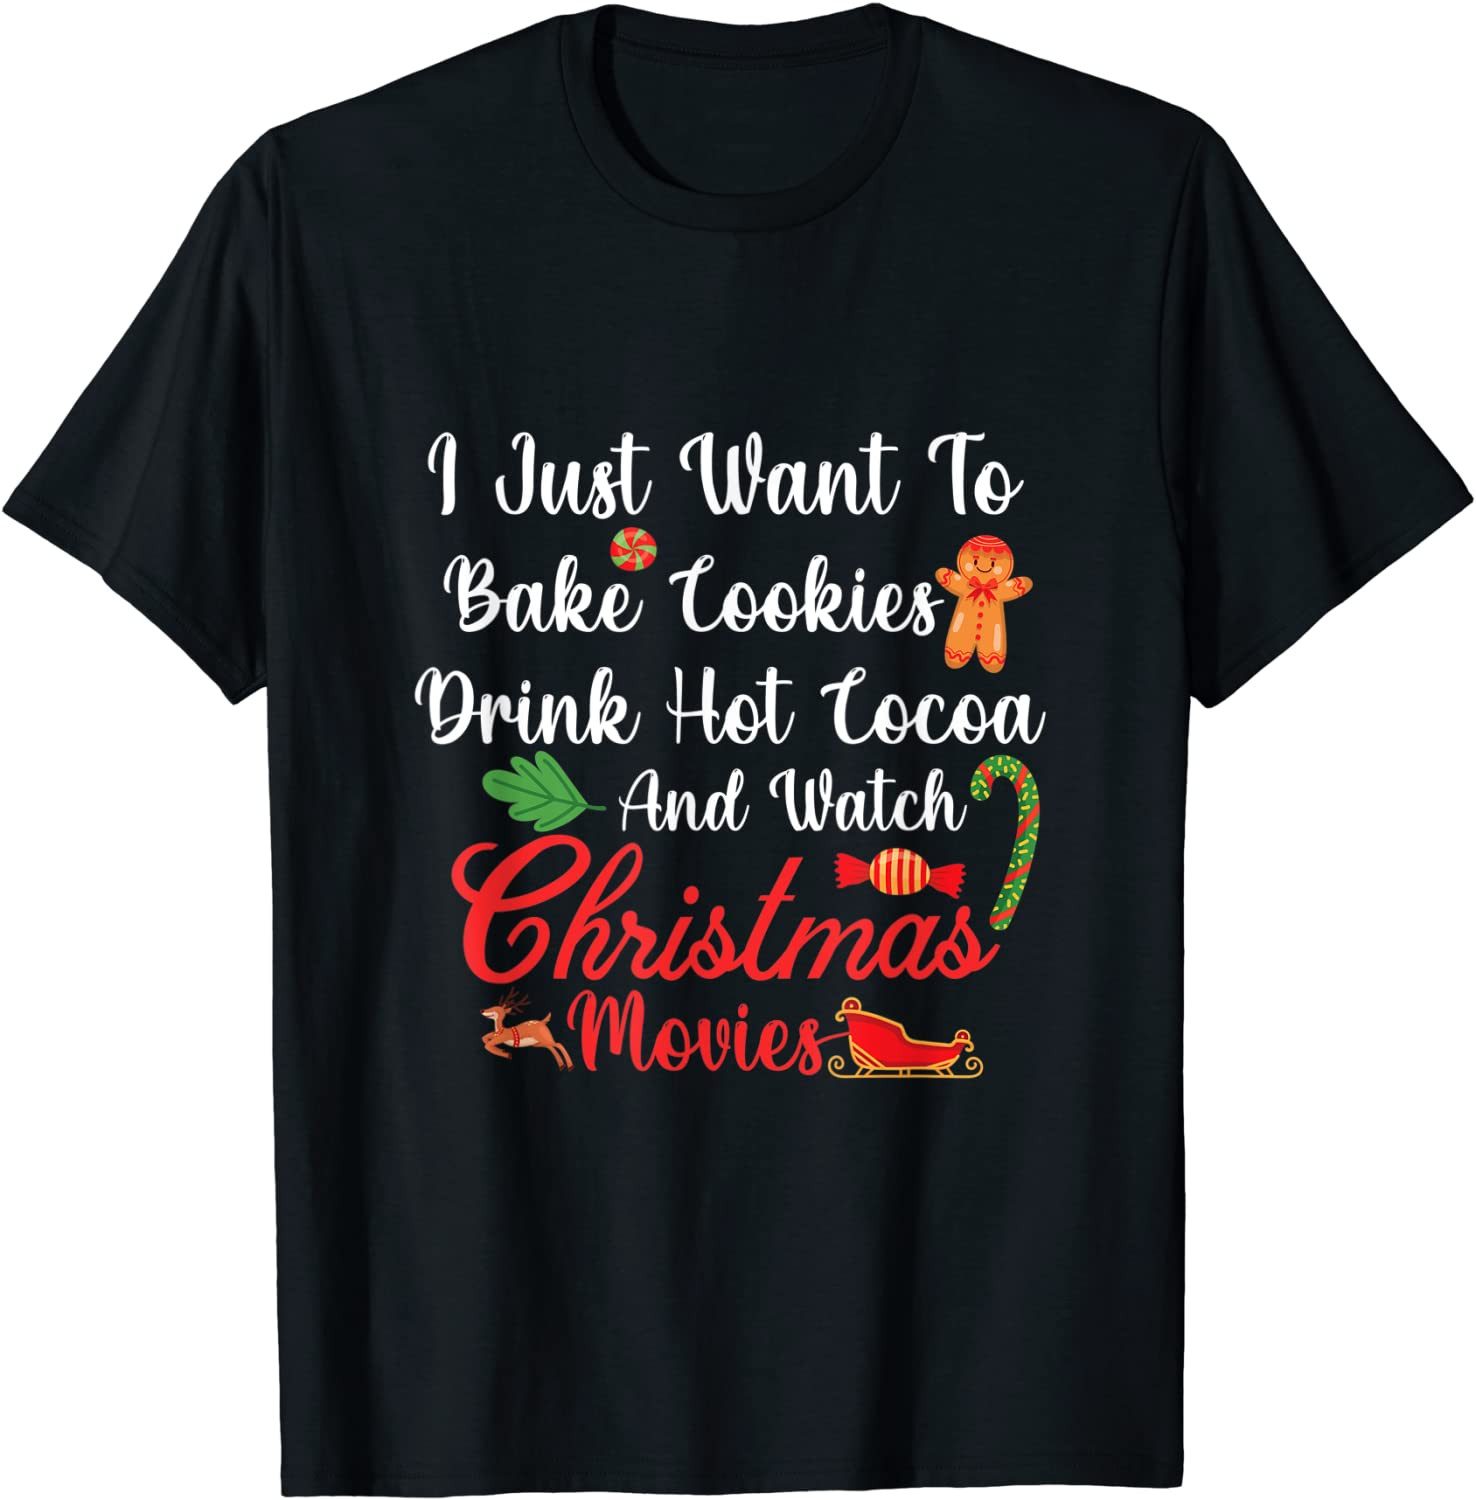 Bake Cookies Drink Hot Cocoa And Watch Christmas Movies T-Shirt